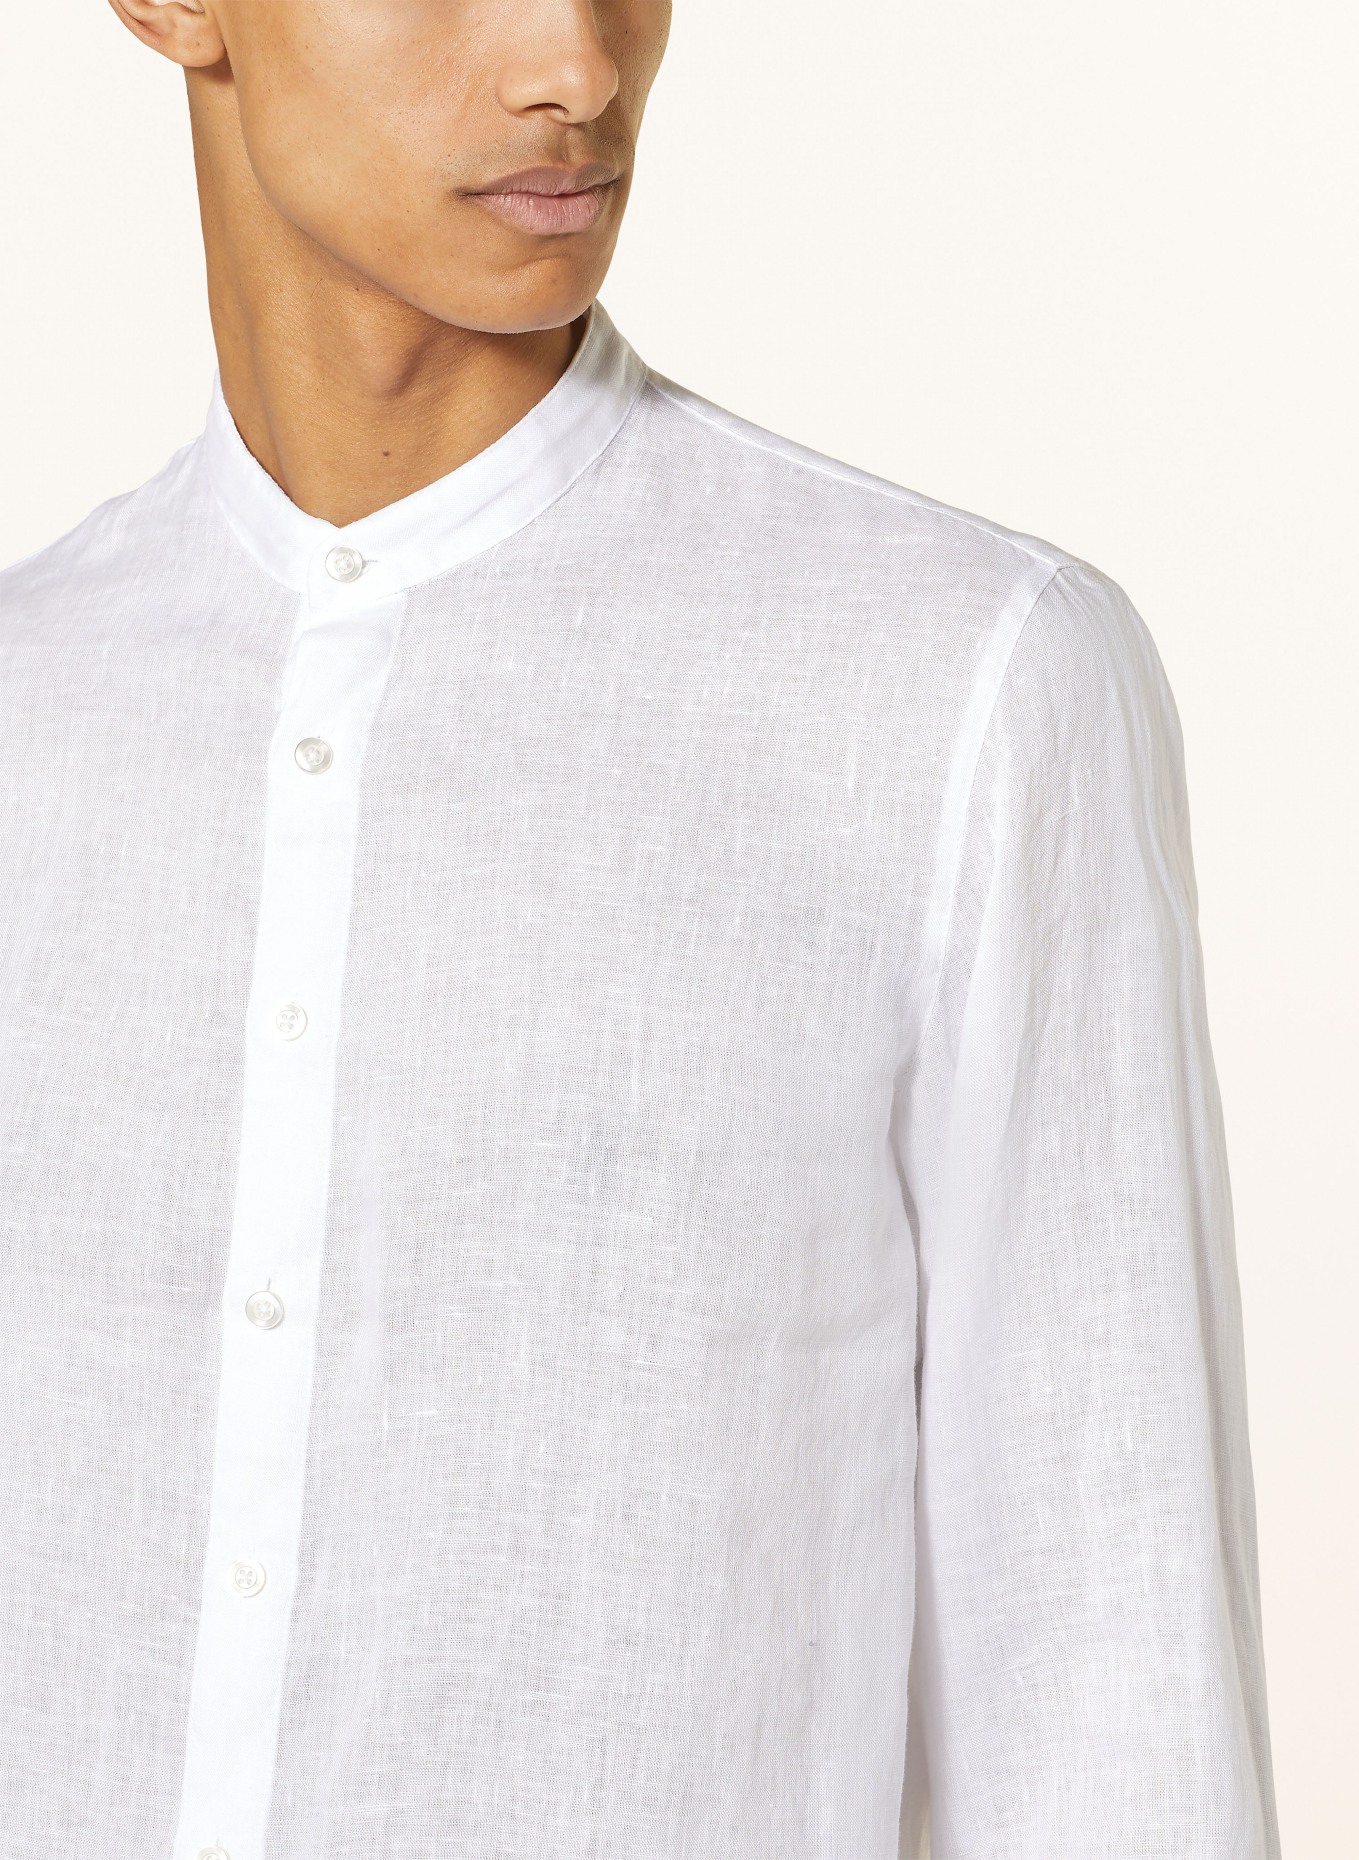 BALDESSARINI Linen shirt regular fit with stand-up collar, Color: WHITE (Image 4)